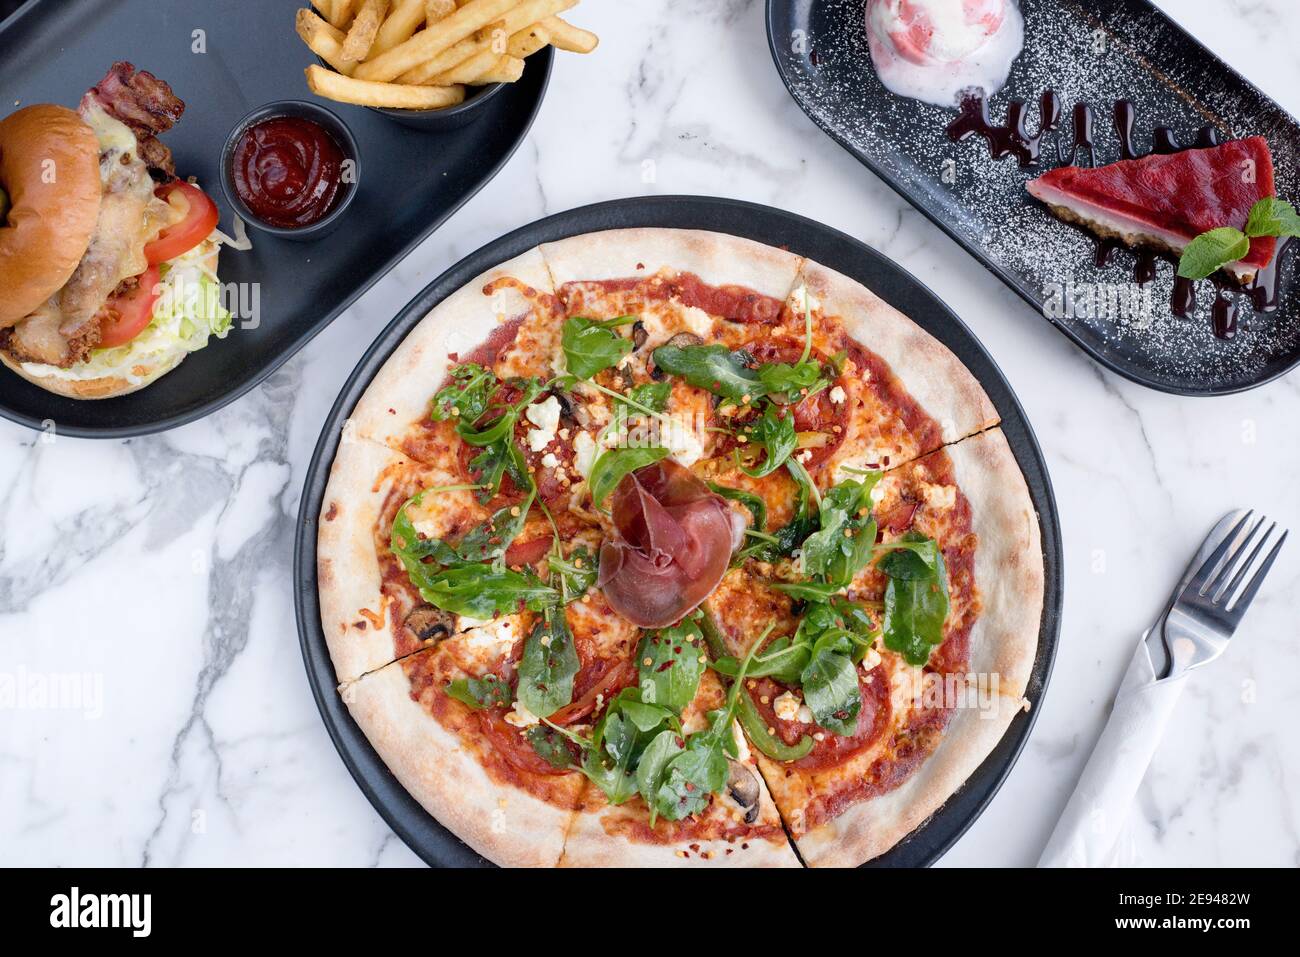 Sheffield, UK - 03 Aug 2017: pepperoni salami and rocket pizza, cheeseburger and fries and cheesecake at OHM, Fitzwilliam Street Stock Photo